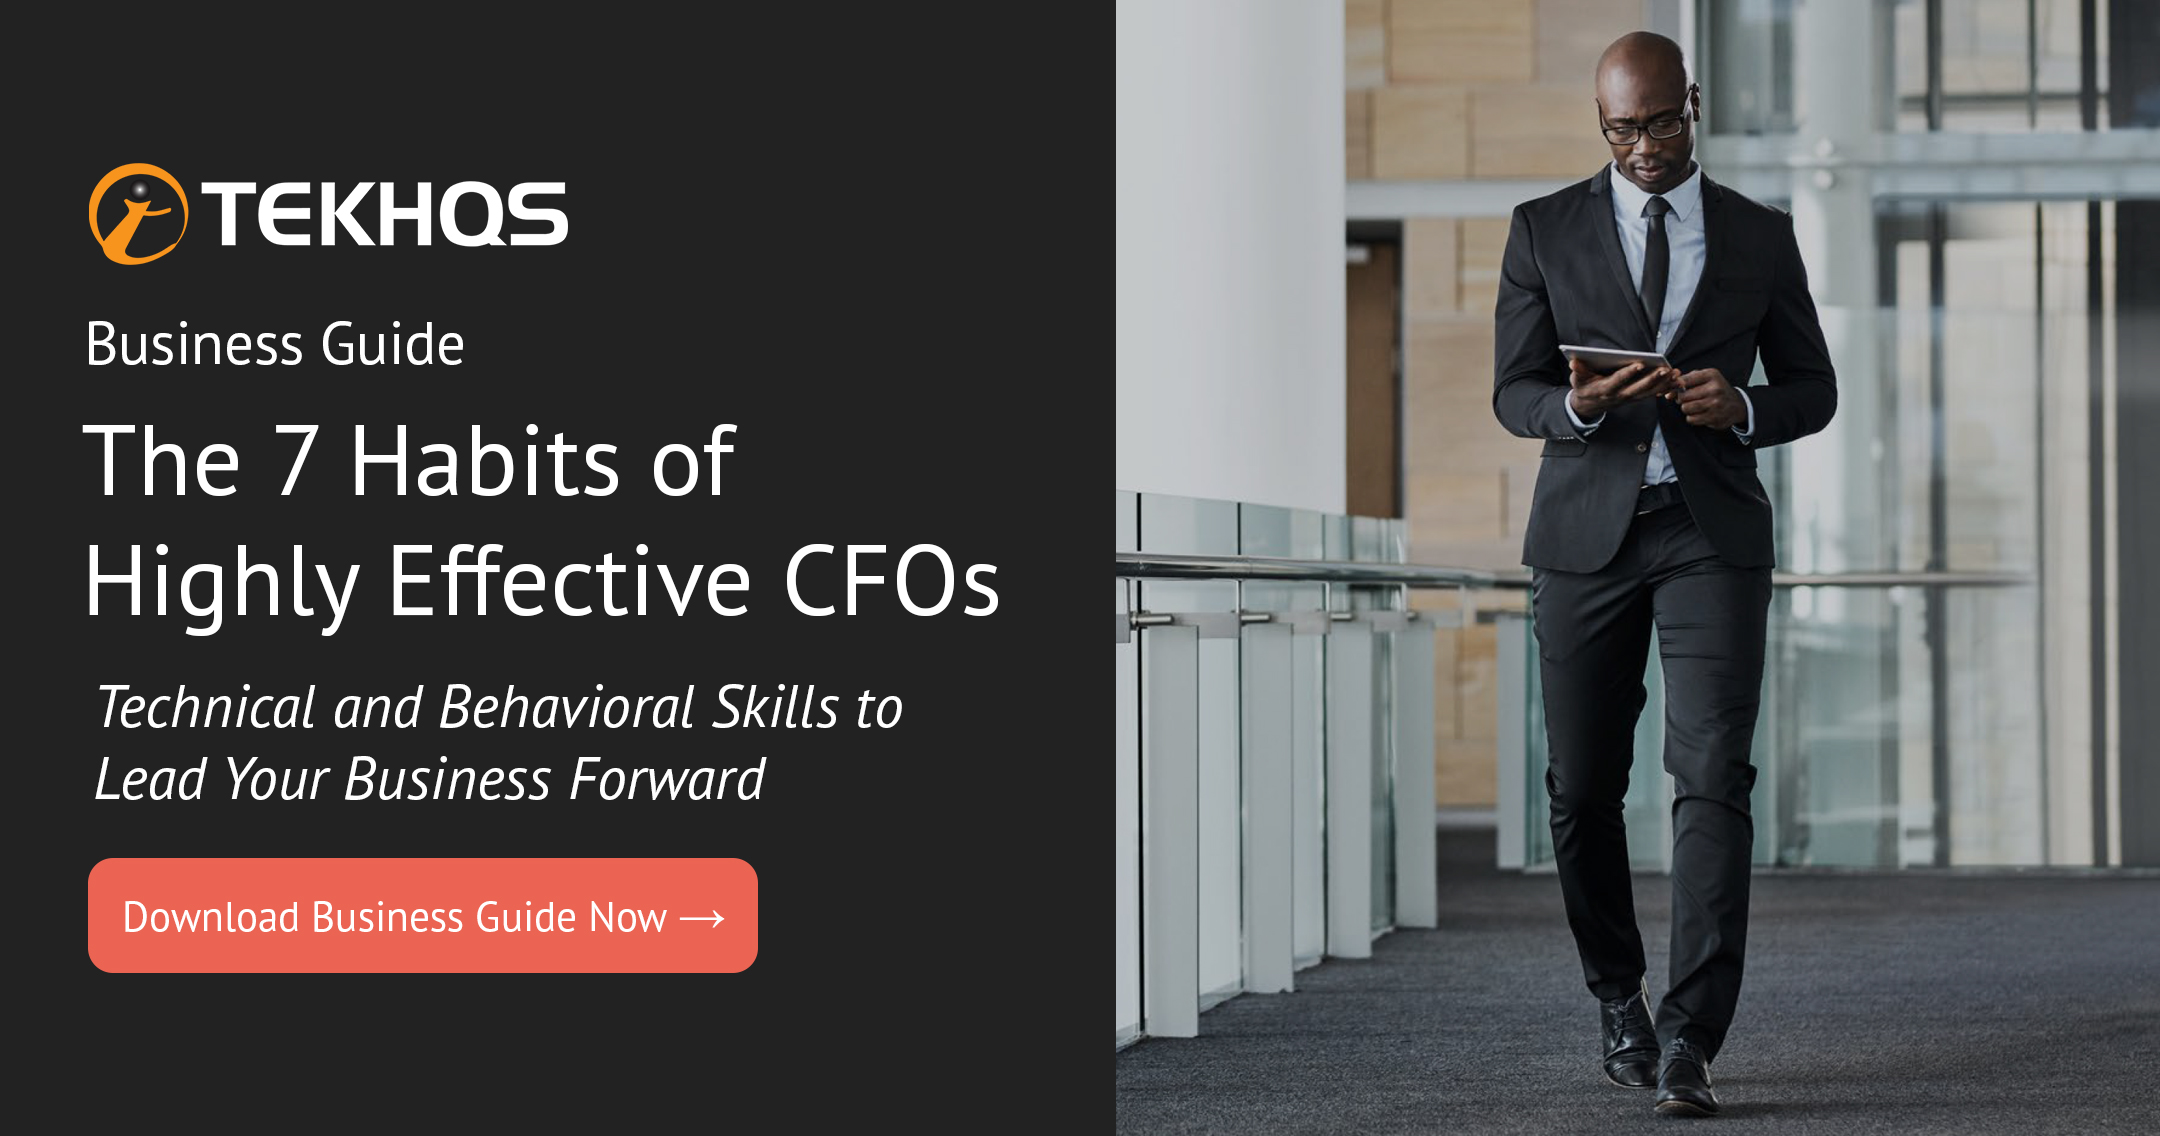 The 7 Habits of Highly Effective CFOs